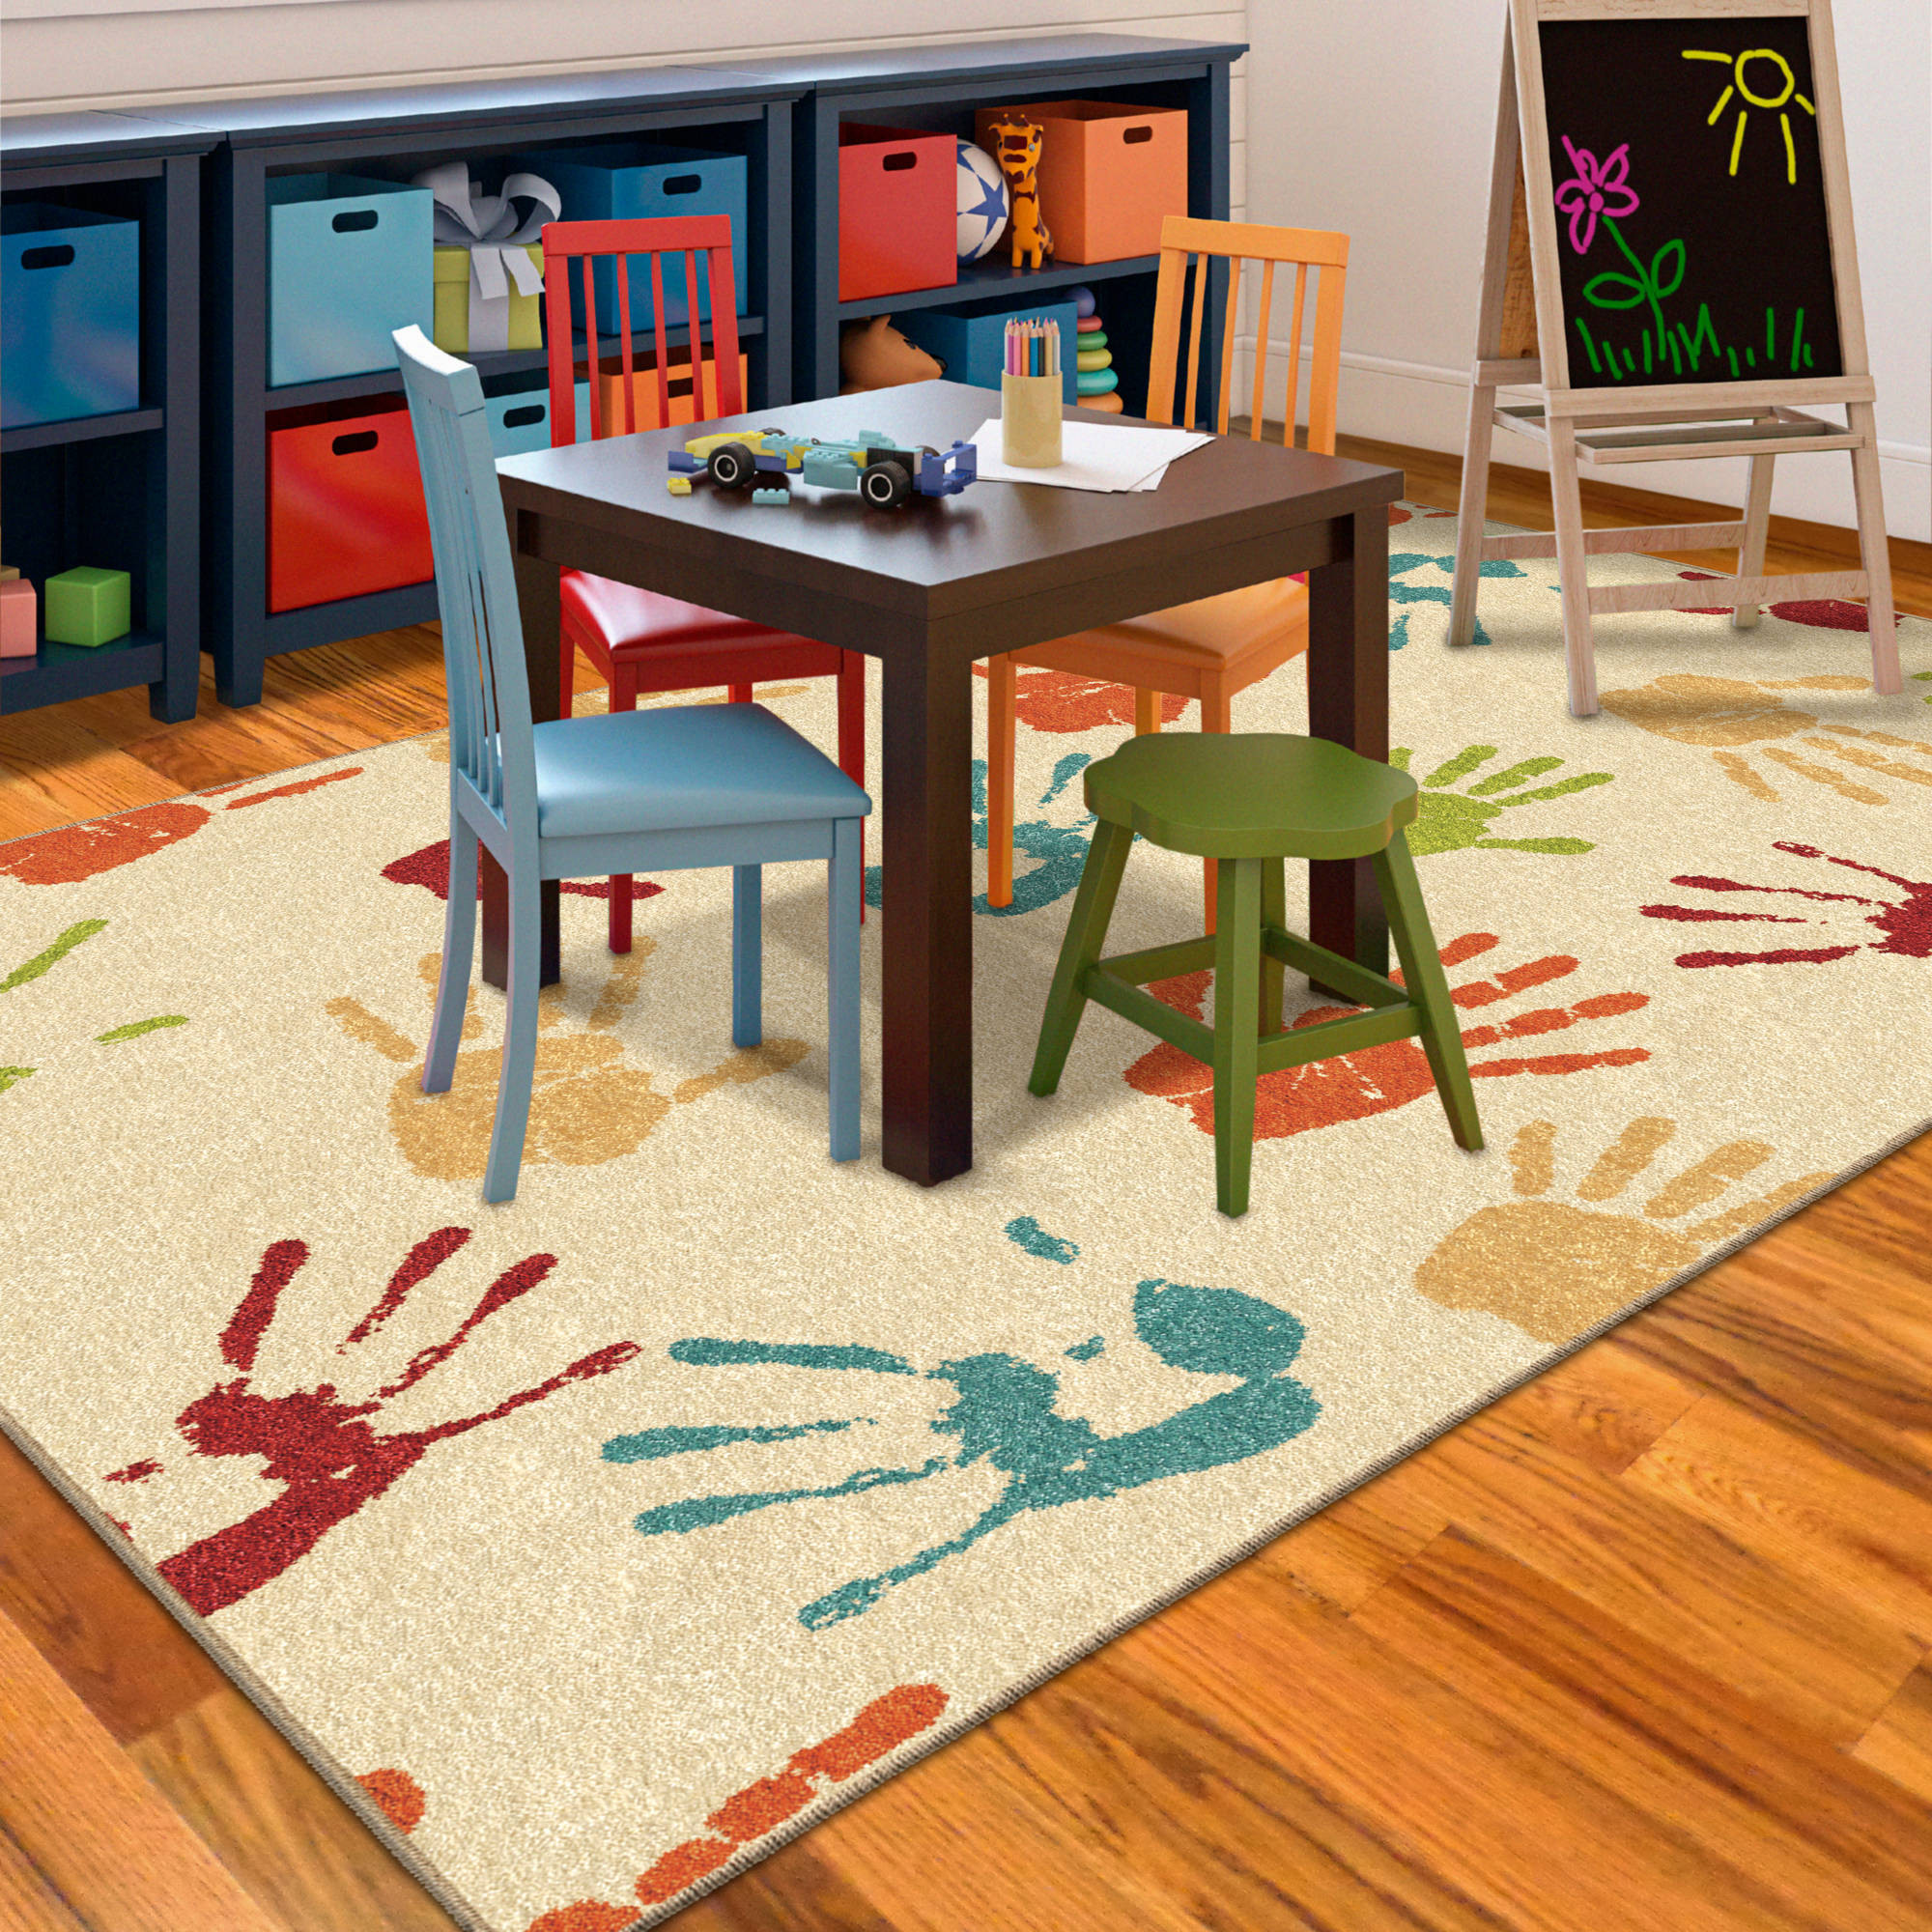 Rug For Kids Room
 5 Things to Think About When Choosing Kids Playroom Rugs